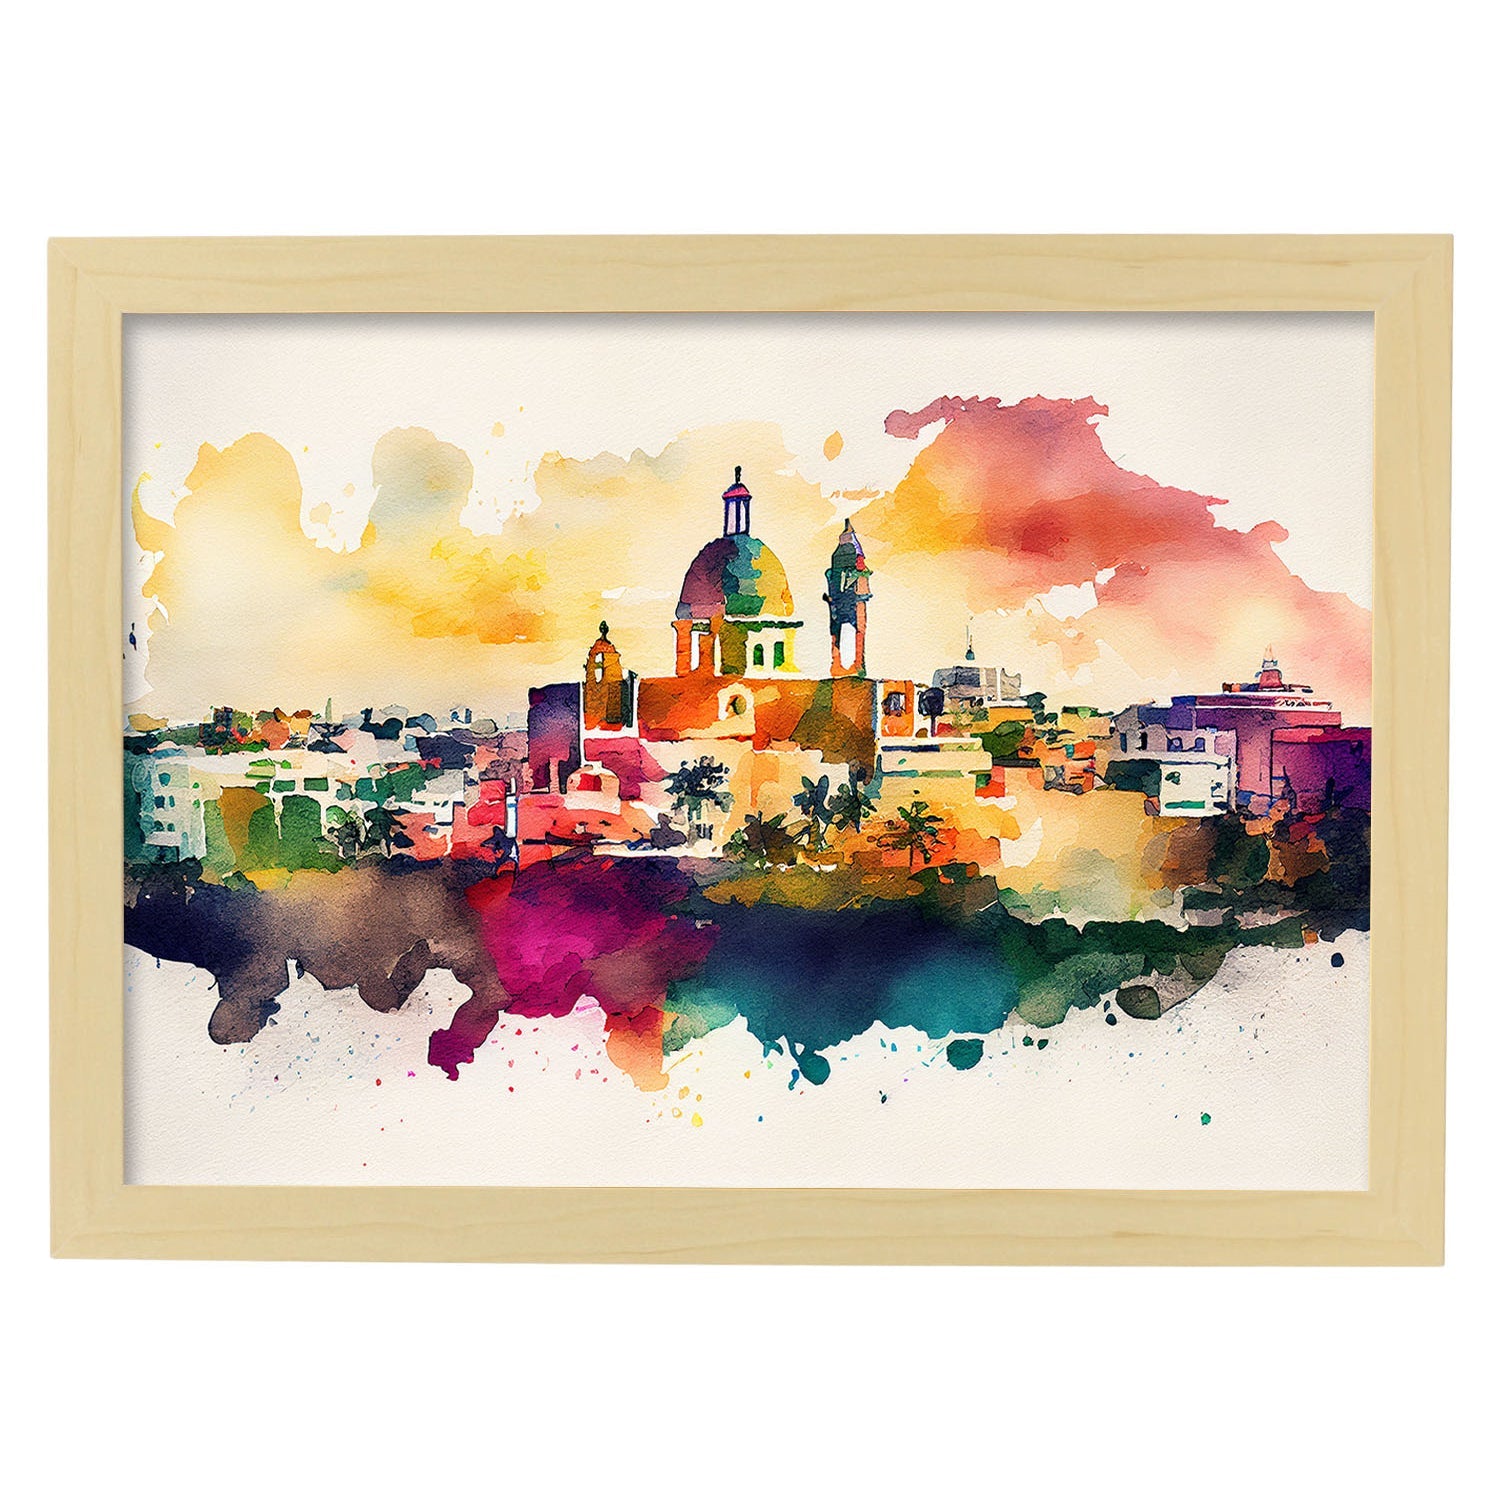 Nacnic watercolor of a skyline of the city of San Juan. Aesthetic Wall Art Prints for Bedroom or Living Room Design.-Artwork-Nacnic-A4-Marco Madera Clara-Nacnic Estudio SL